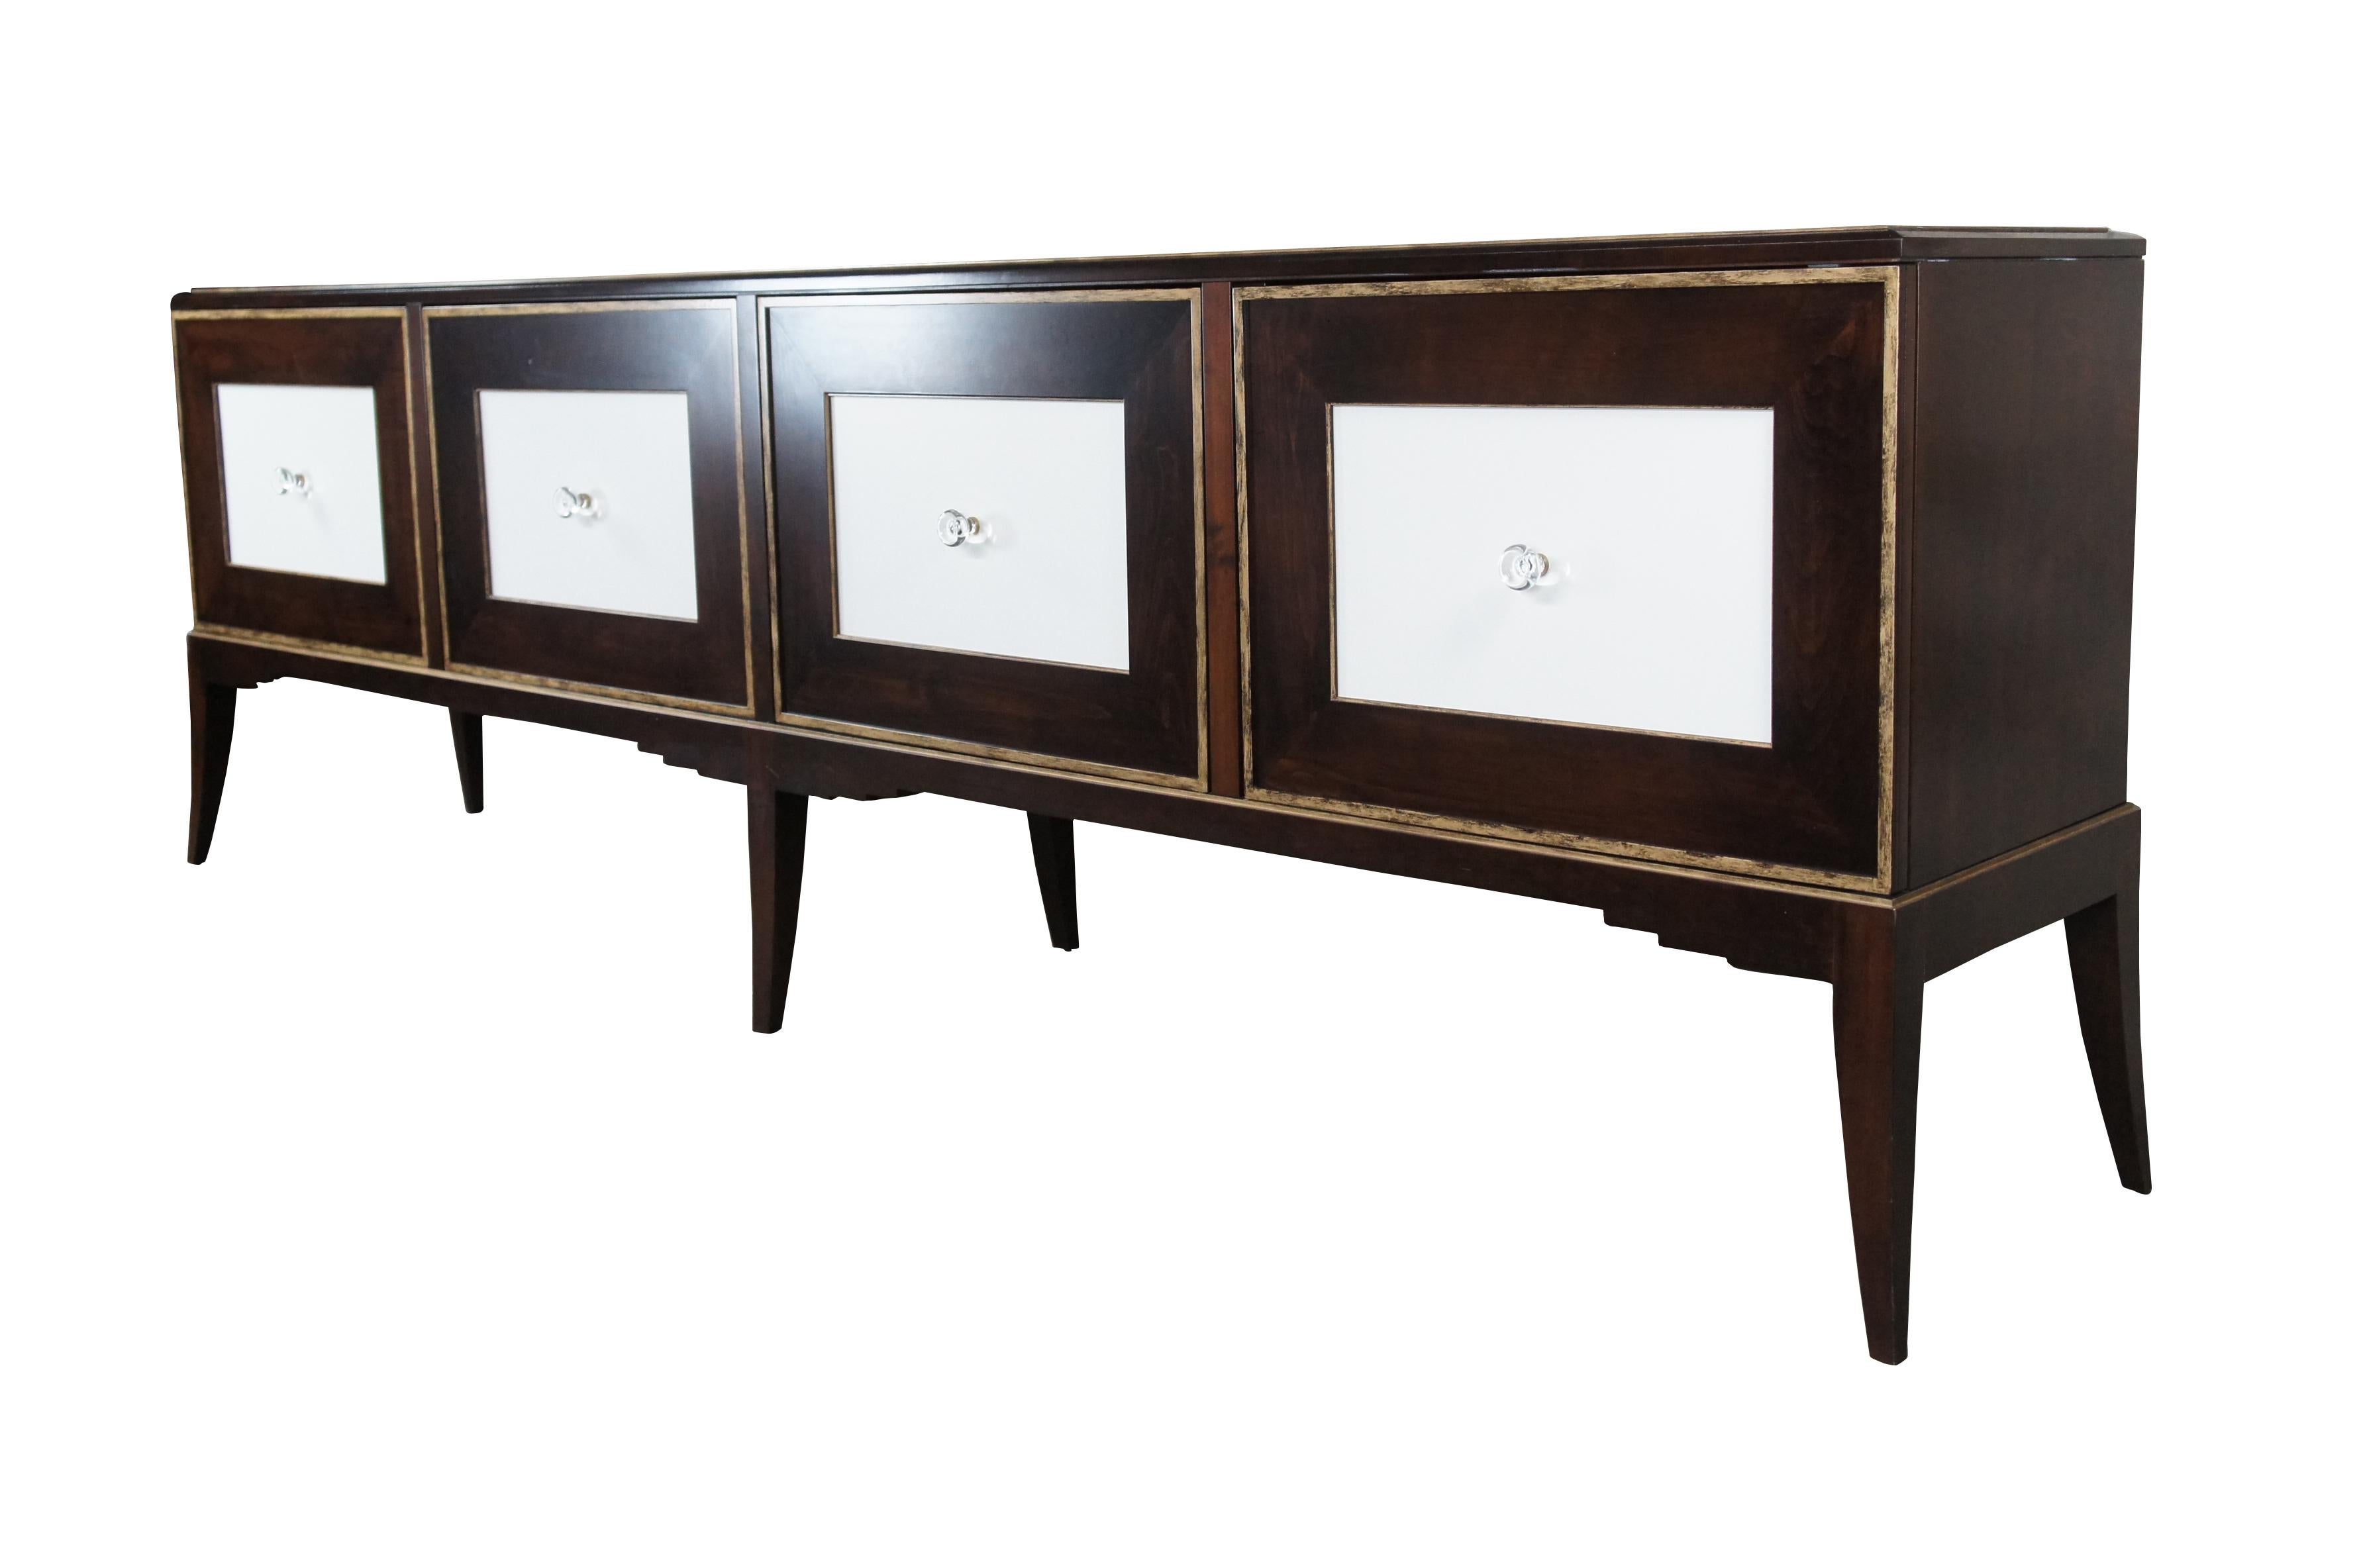 A large and impressive sideboard or credenza cabinet by John Richard.  Features a blend of Art Deco and Contemporary styling.  Made from Walnut with brushed gold finish along the doors and lower apron.  Features white inset panels with glass pulls. 